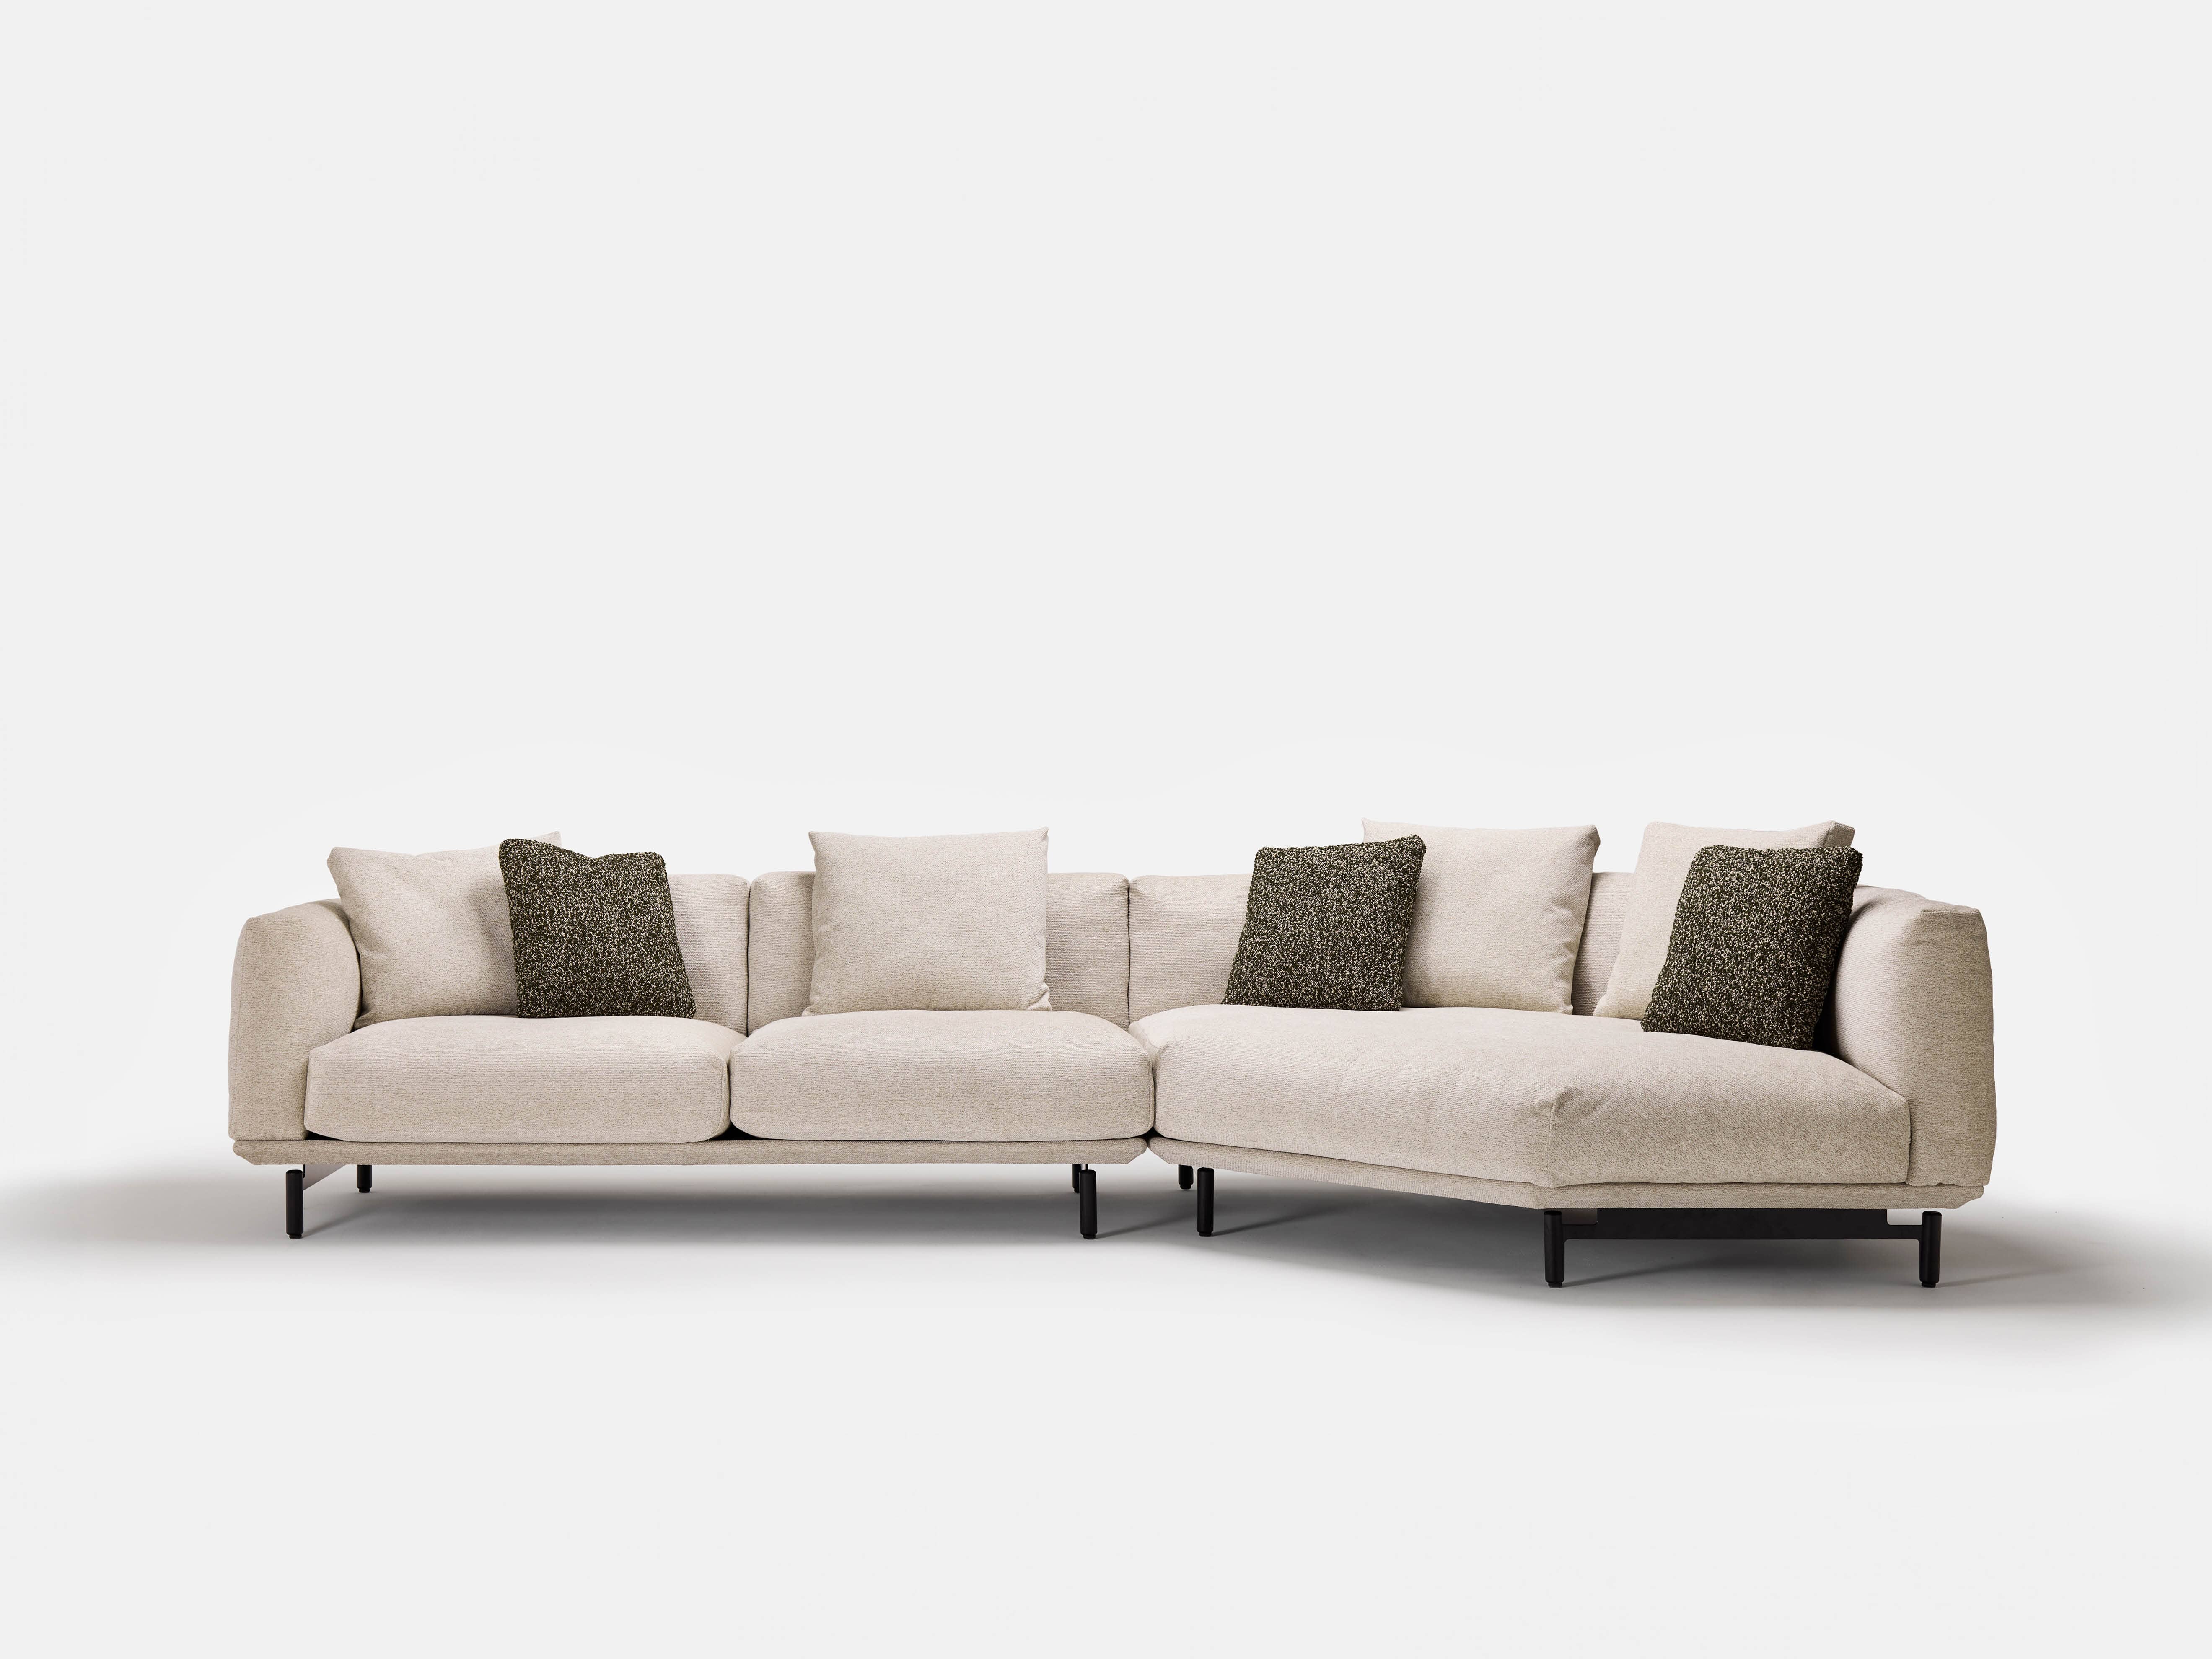 Designer Sofa Collections for Luxurious Comfort | Cosh Living